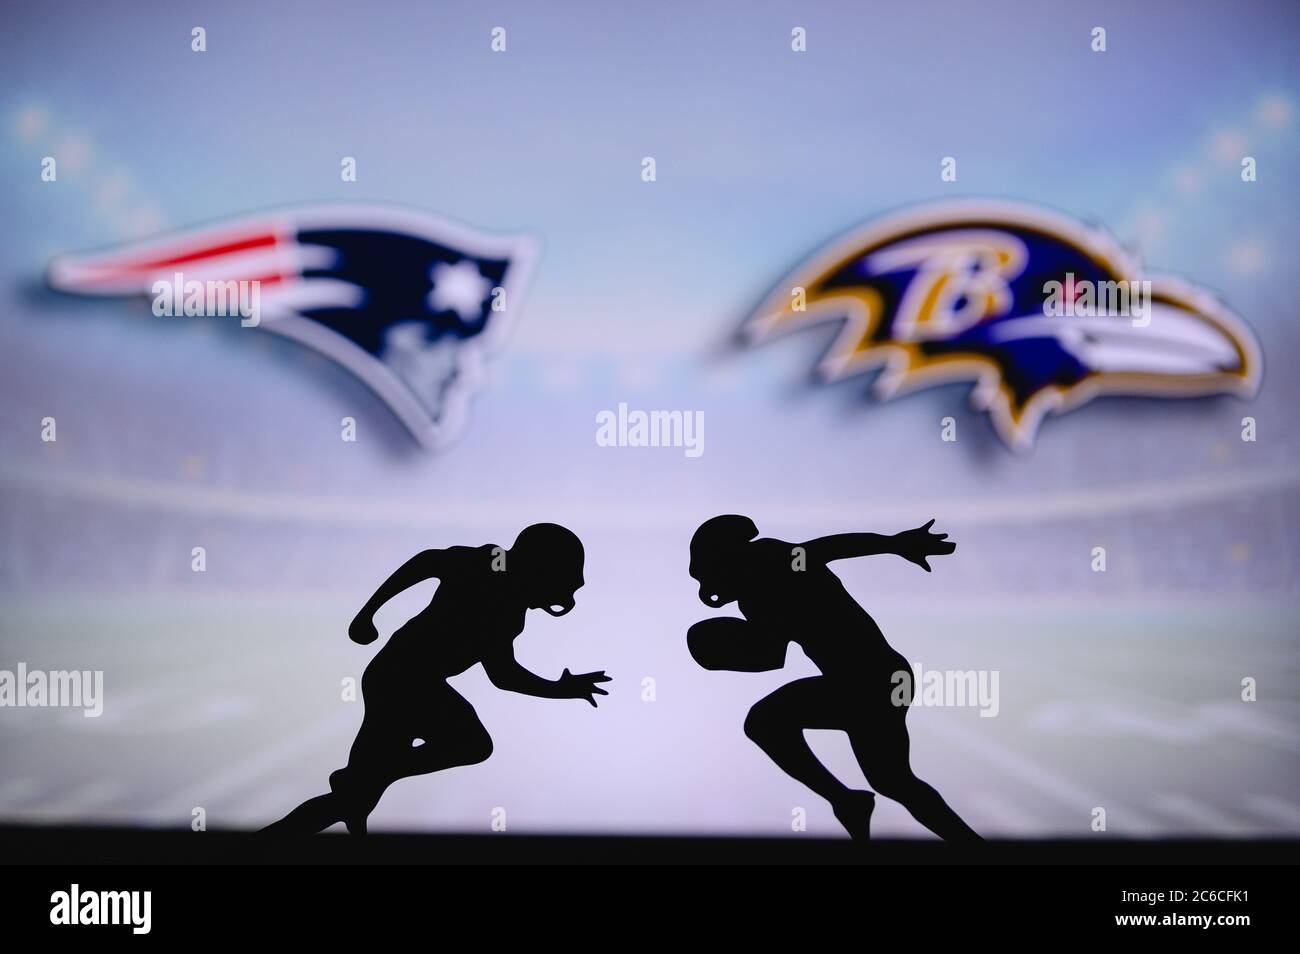 New England Patriots vs. Baltimore Ravens. NFL match poster. Two american football players silhouette facing each other on the field. Clubs logo in ba Stock Photo